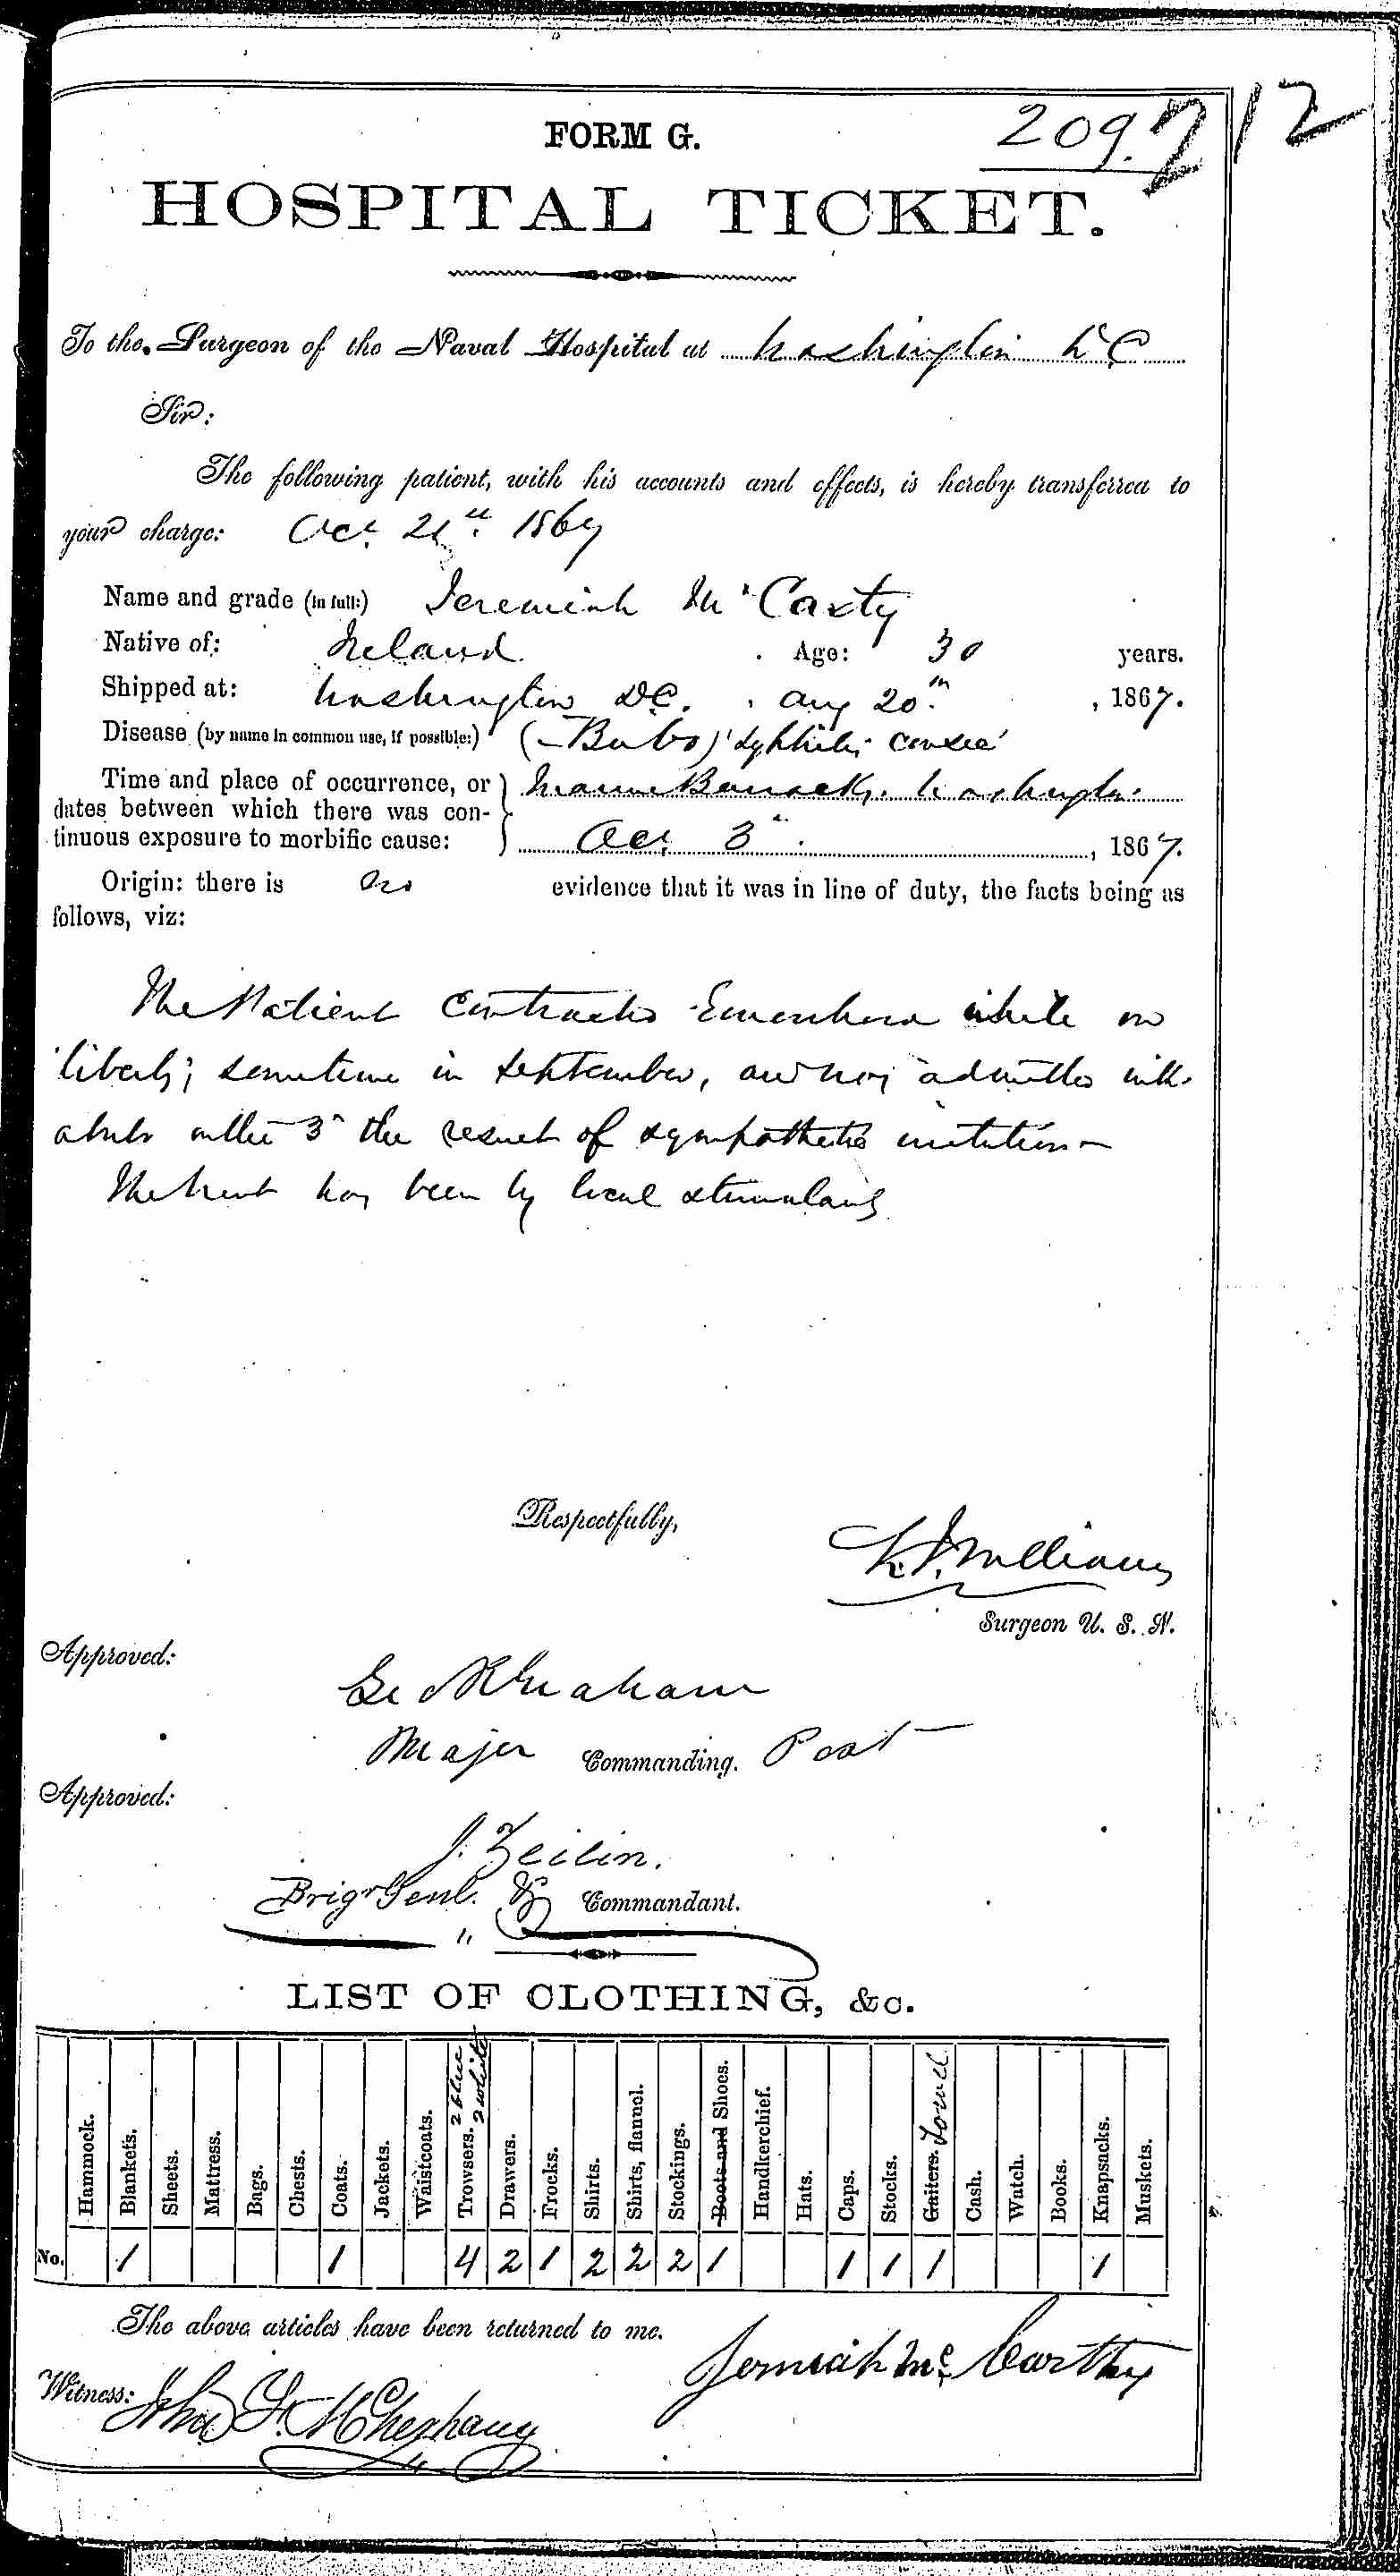 Entry for Jeremiah McCarty (page 1 of 2) in the log Hospital Tickets and Case Papers - Naval Hospital - Washington, D.C. - 1866-68